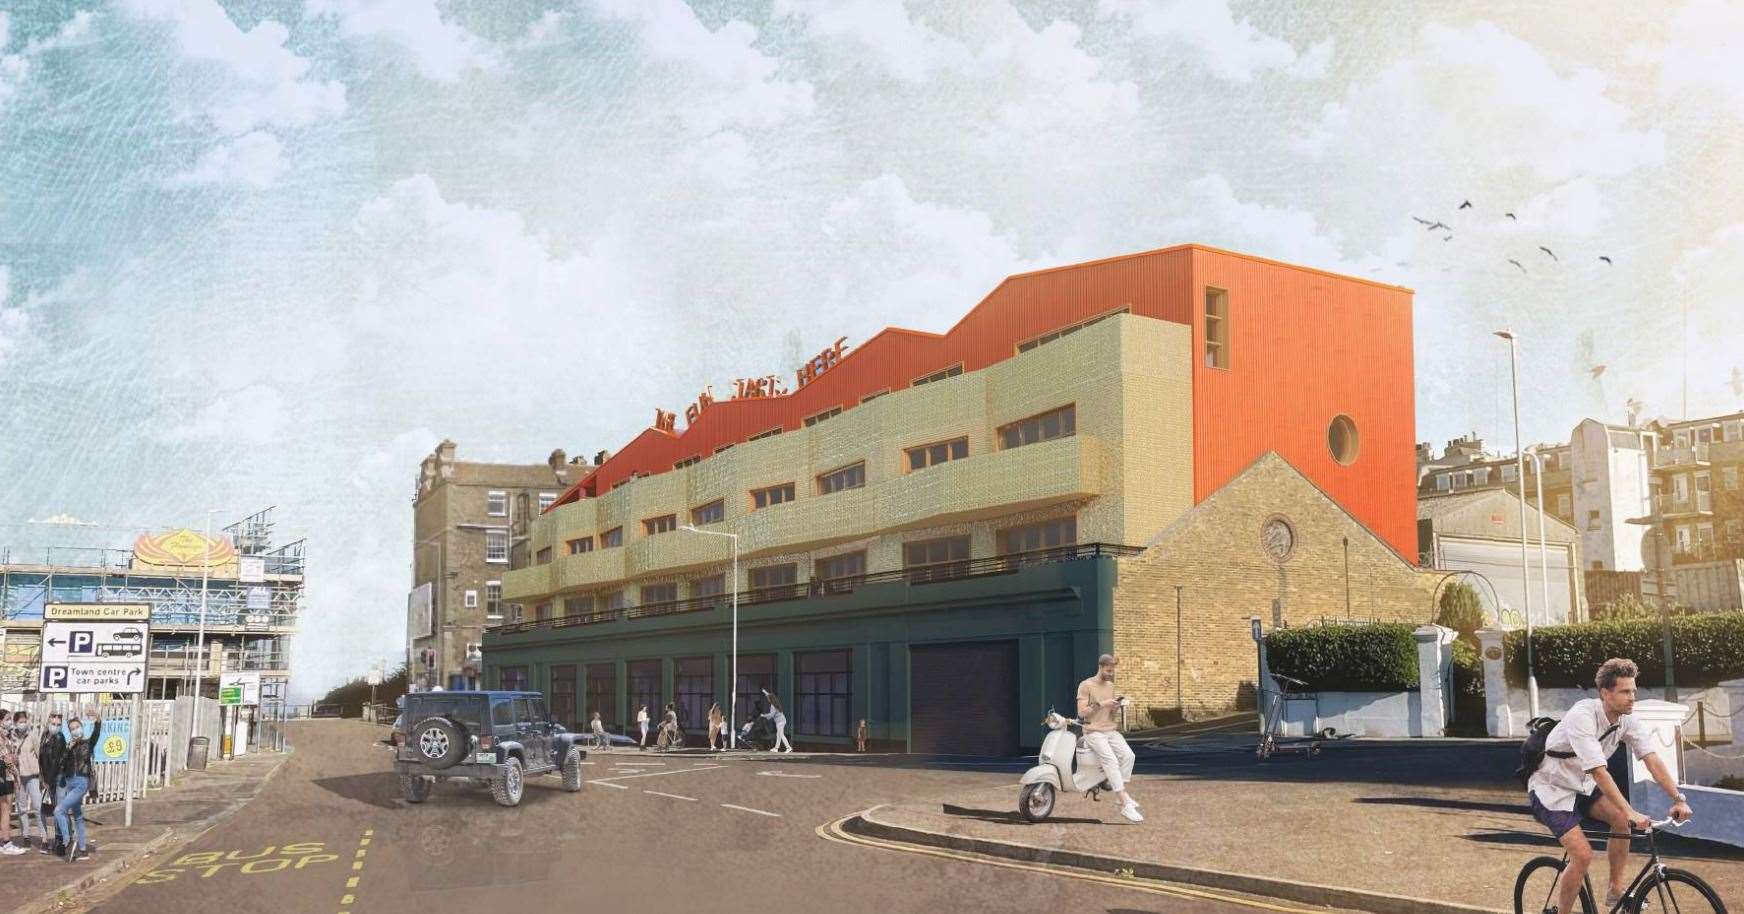 Plans have been lodged with Thanet District Council for a 10-flat development in Belgrave Road, Margate